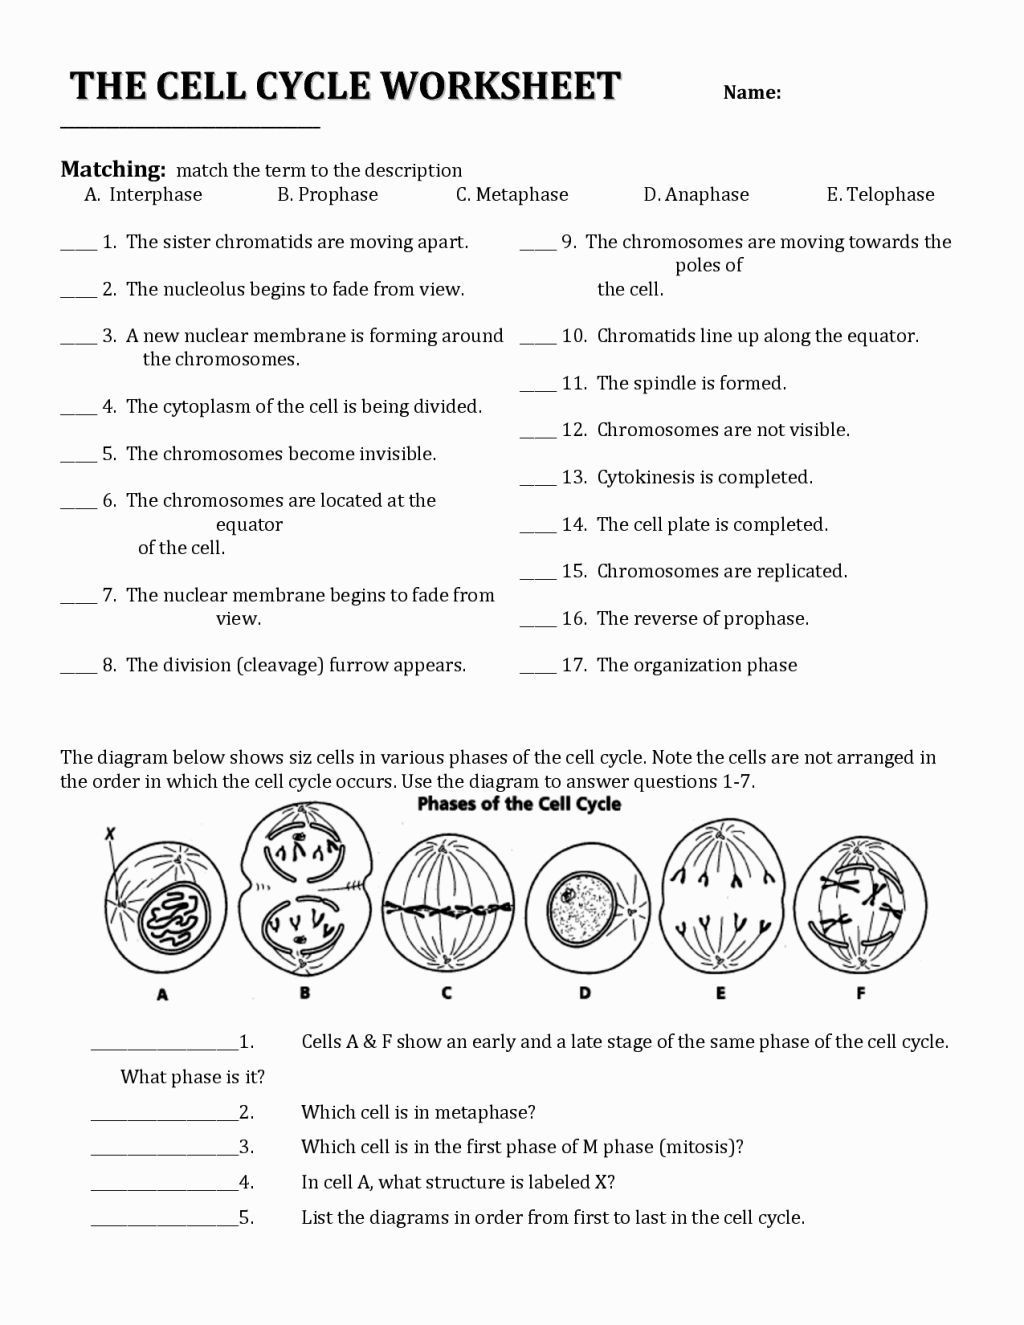 Cell Cycle and Mitosis Worksheet the Cell Cycle Coloring Worksheet Key